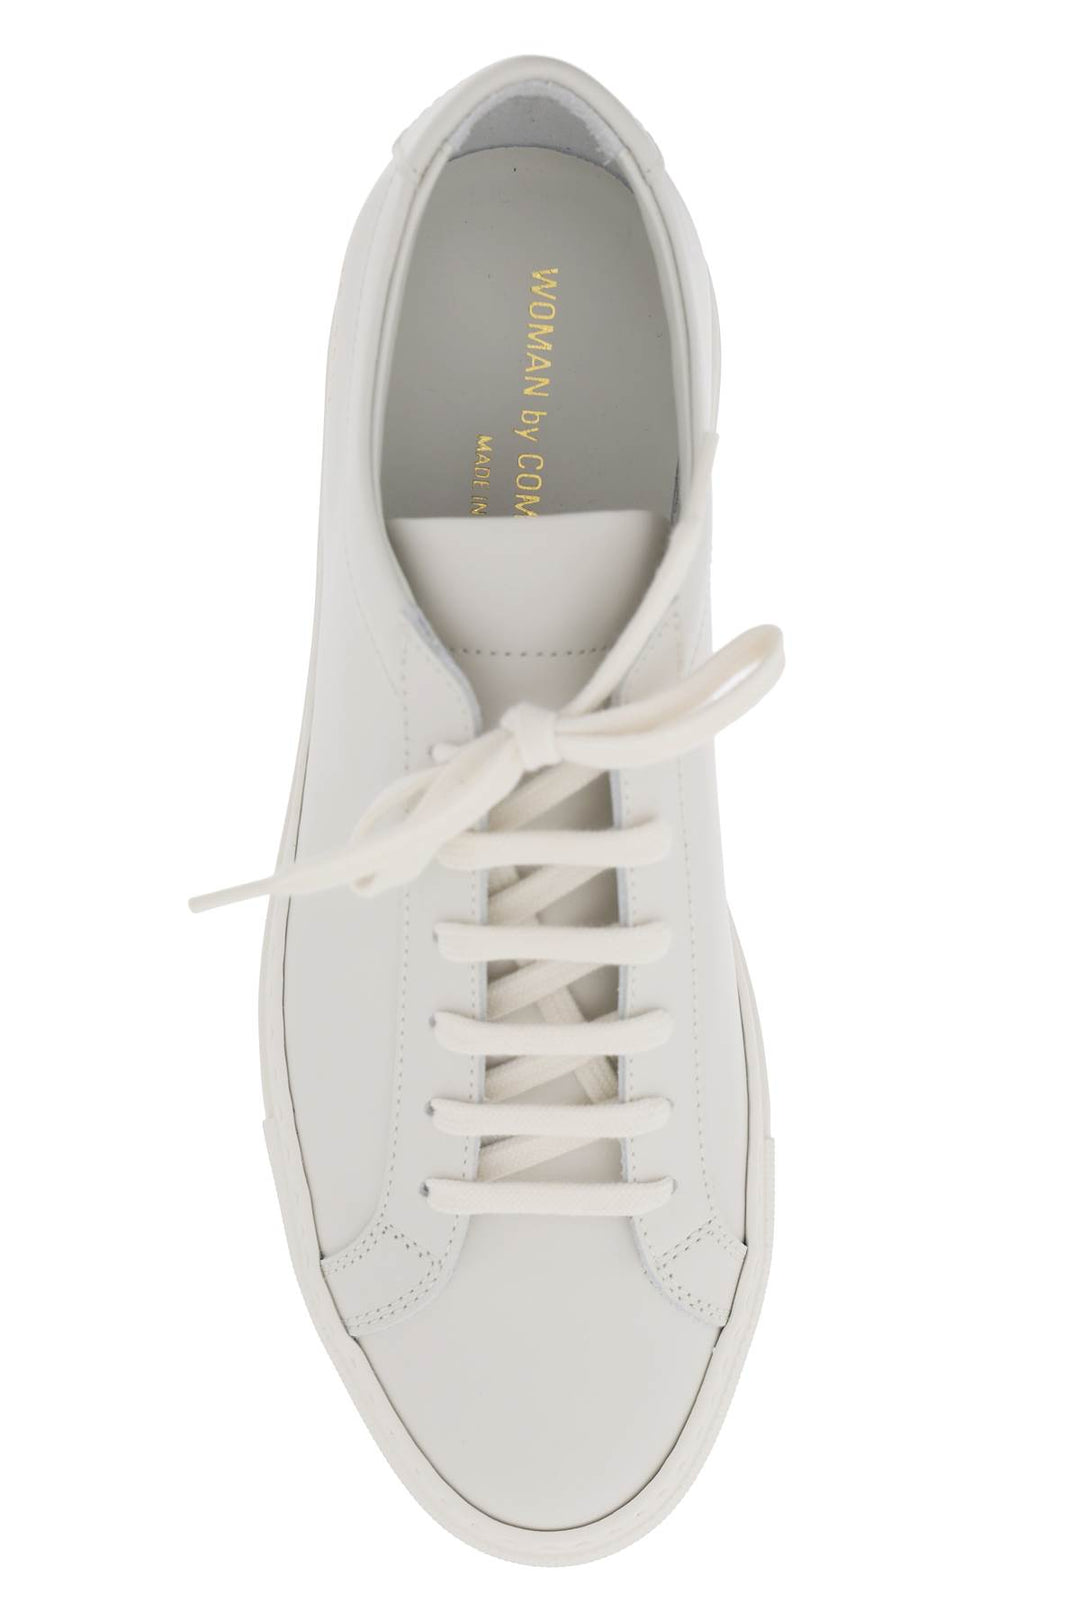 Common Projects Original Achilles Leather Sneakers   Neutral